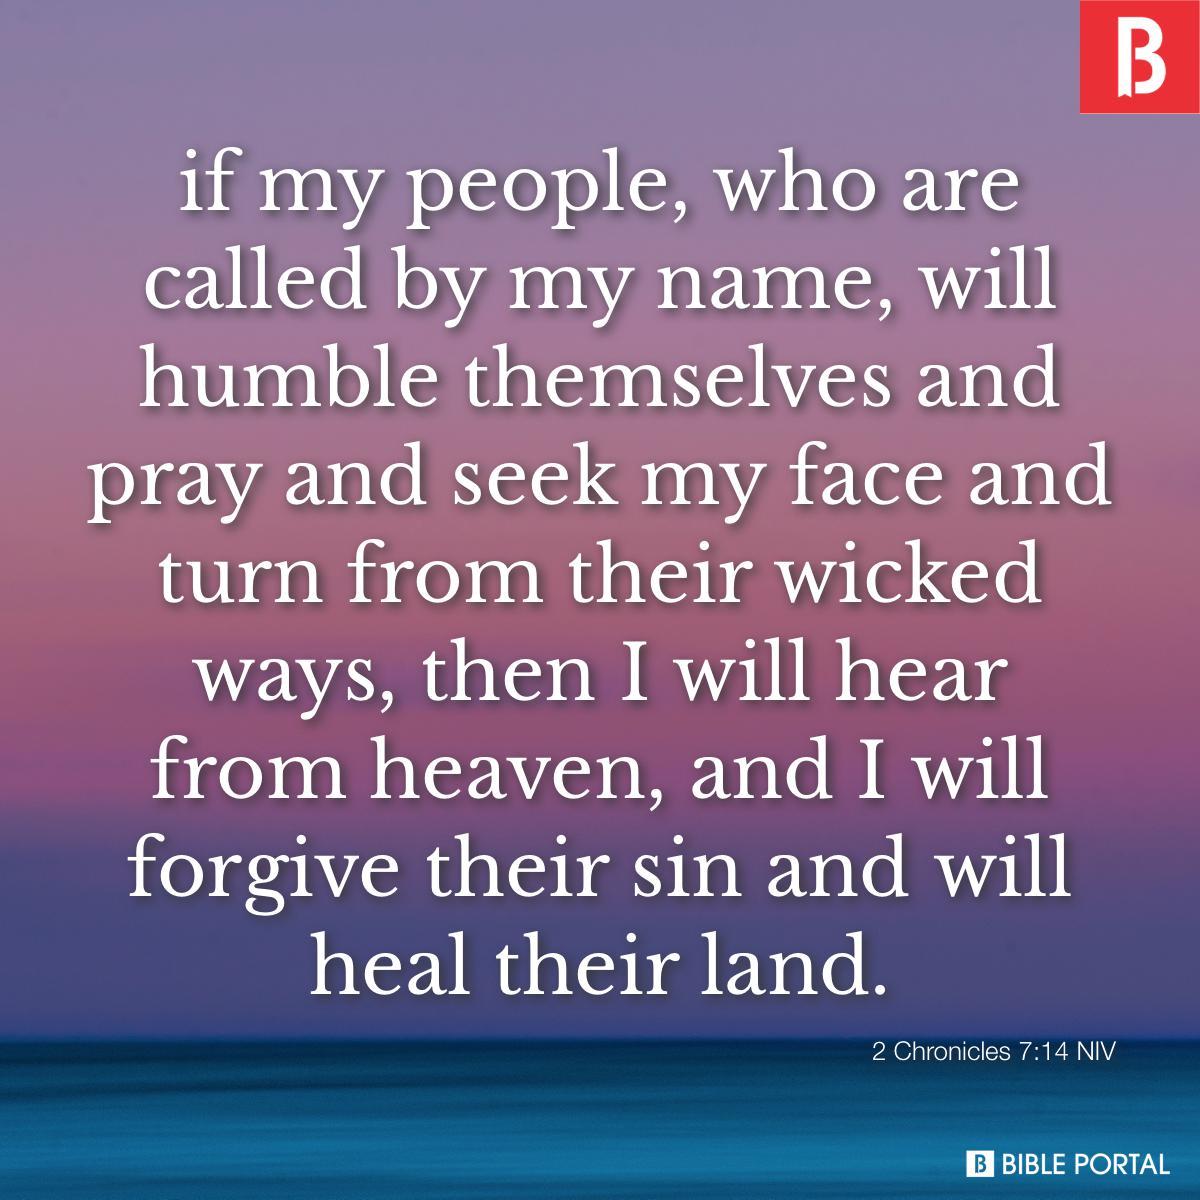 Bible verse of the day - September 13, 2021 - 2 Chronicles 7:14